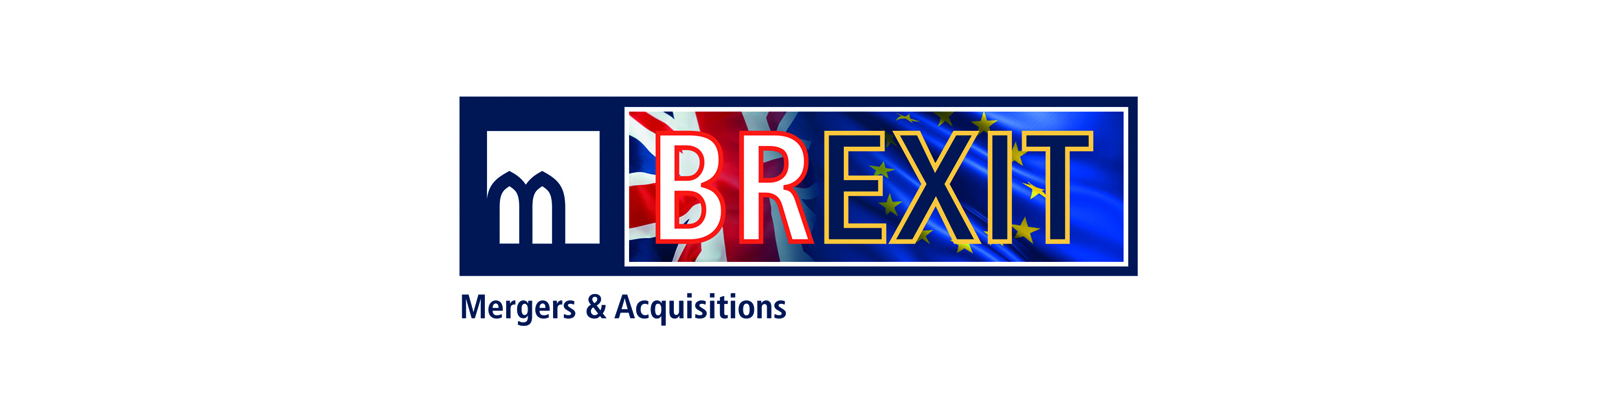 M&A in the time of Brexit